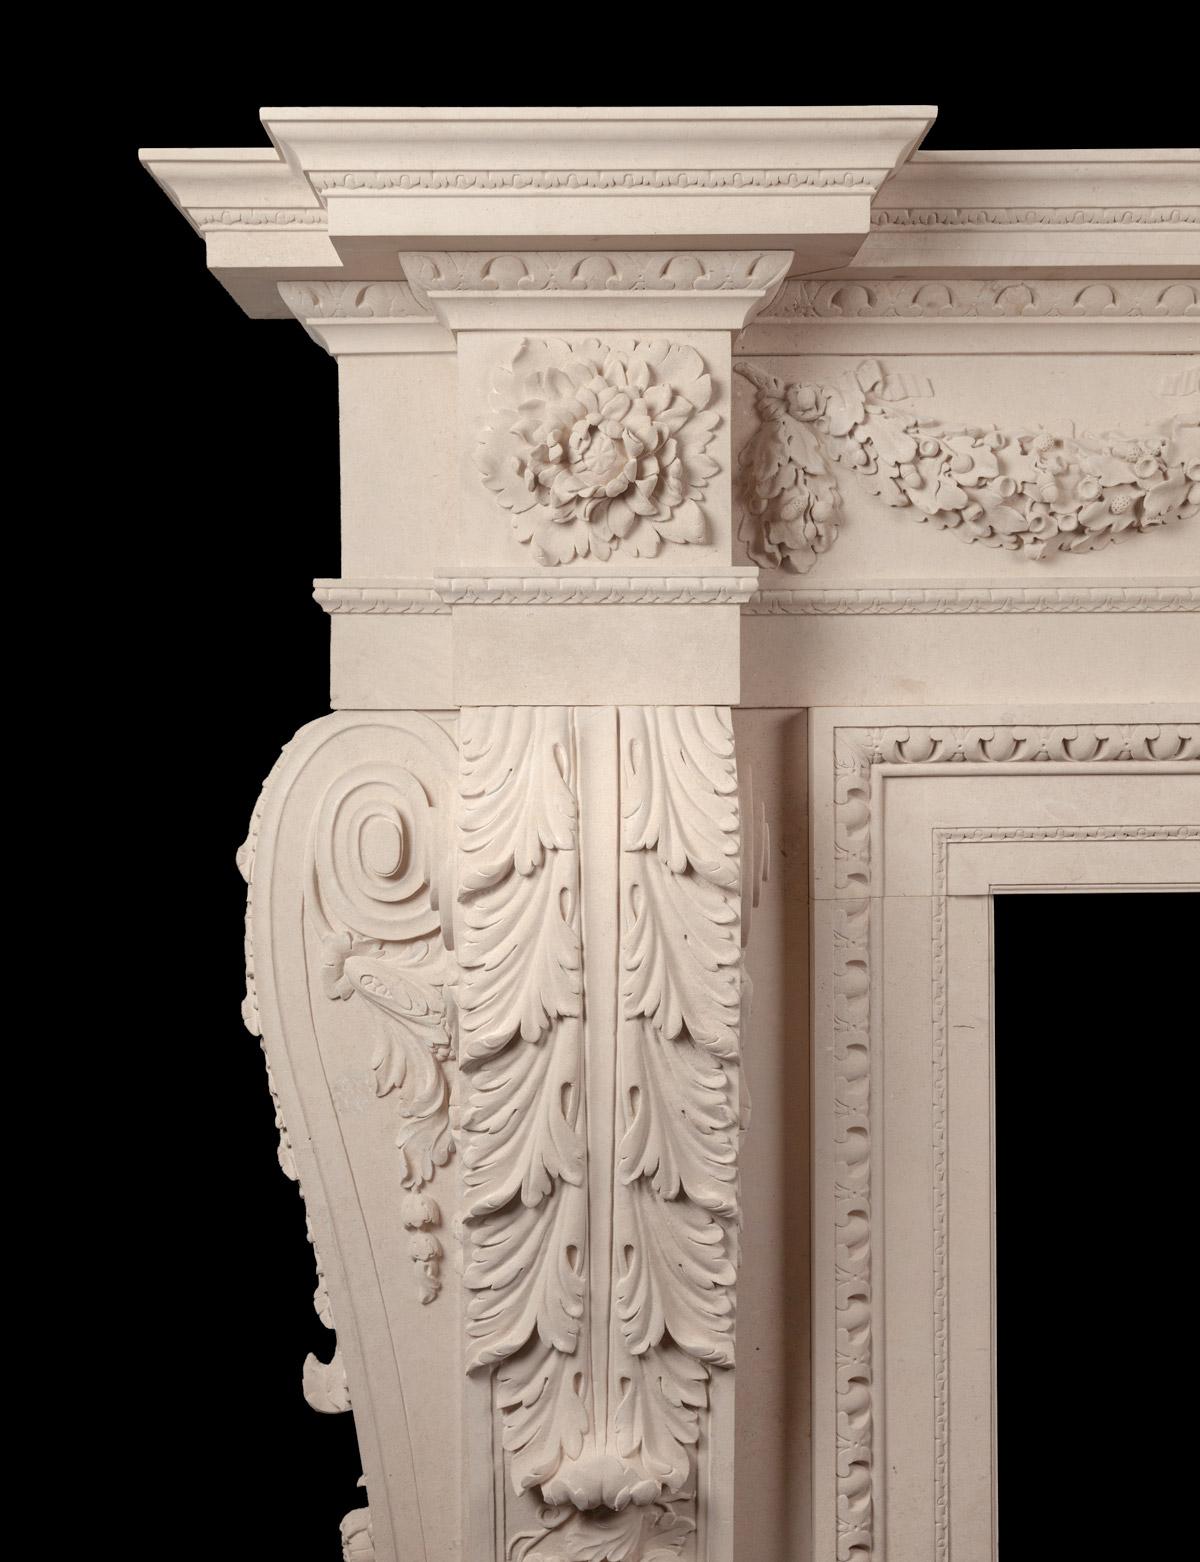 A magnificent hand carved Portland stone fireplace in the manner of renowned 18th century architect ‘William Chambers’
This generous sized fireplace with strong and bold Palladian design, was meticulously hand carved over a period of many months by